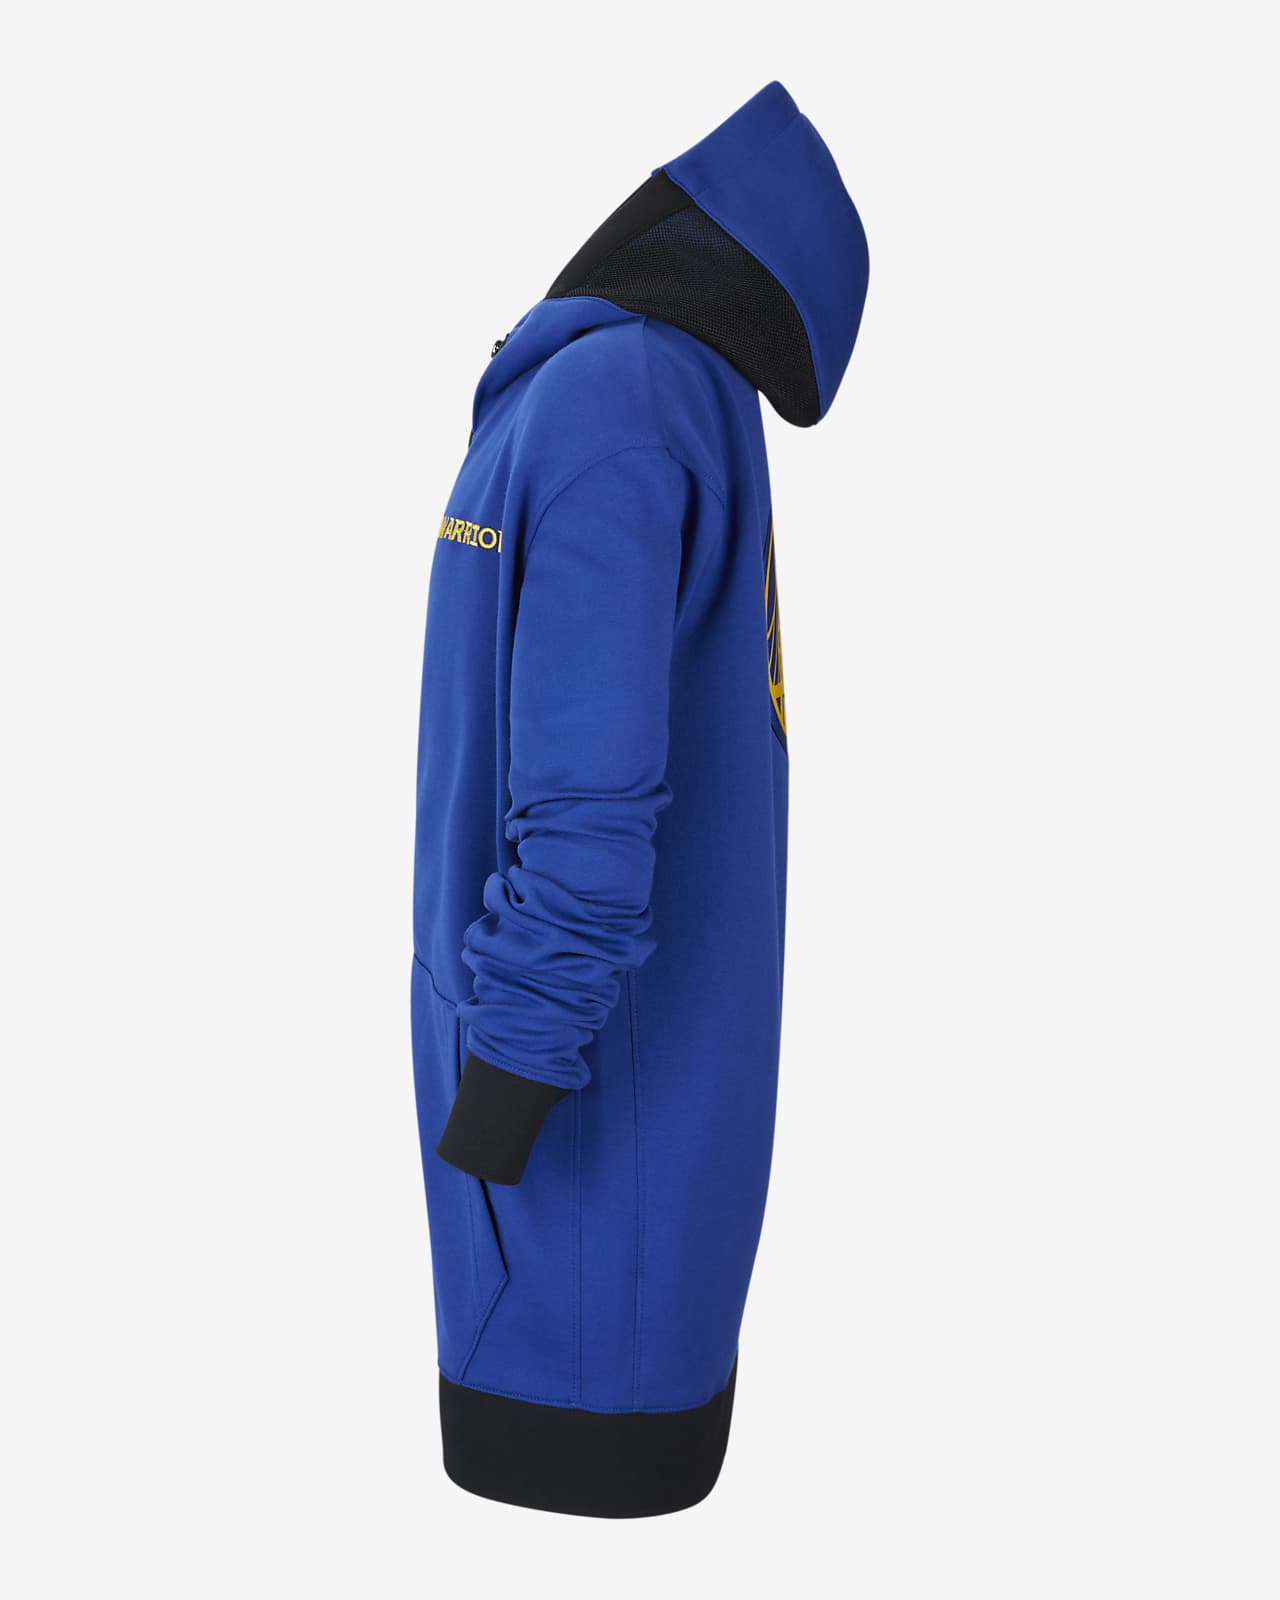 golden state warriors nike therma flex showtime jacket